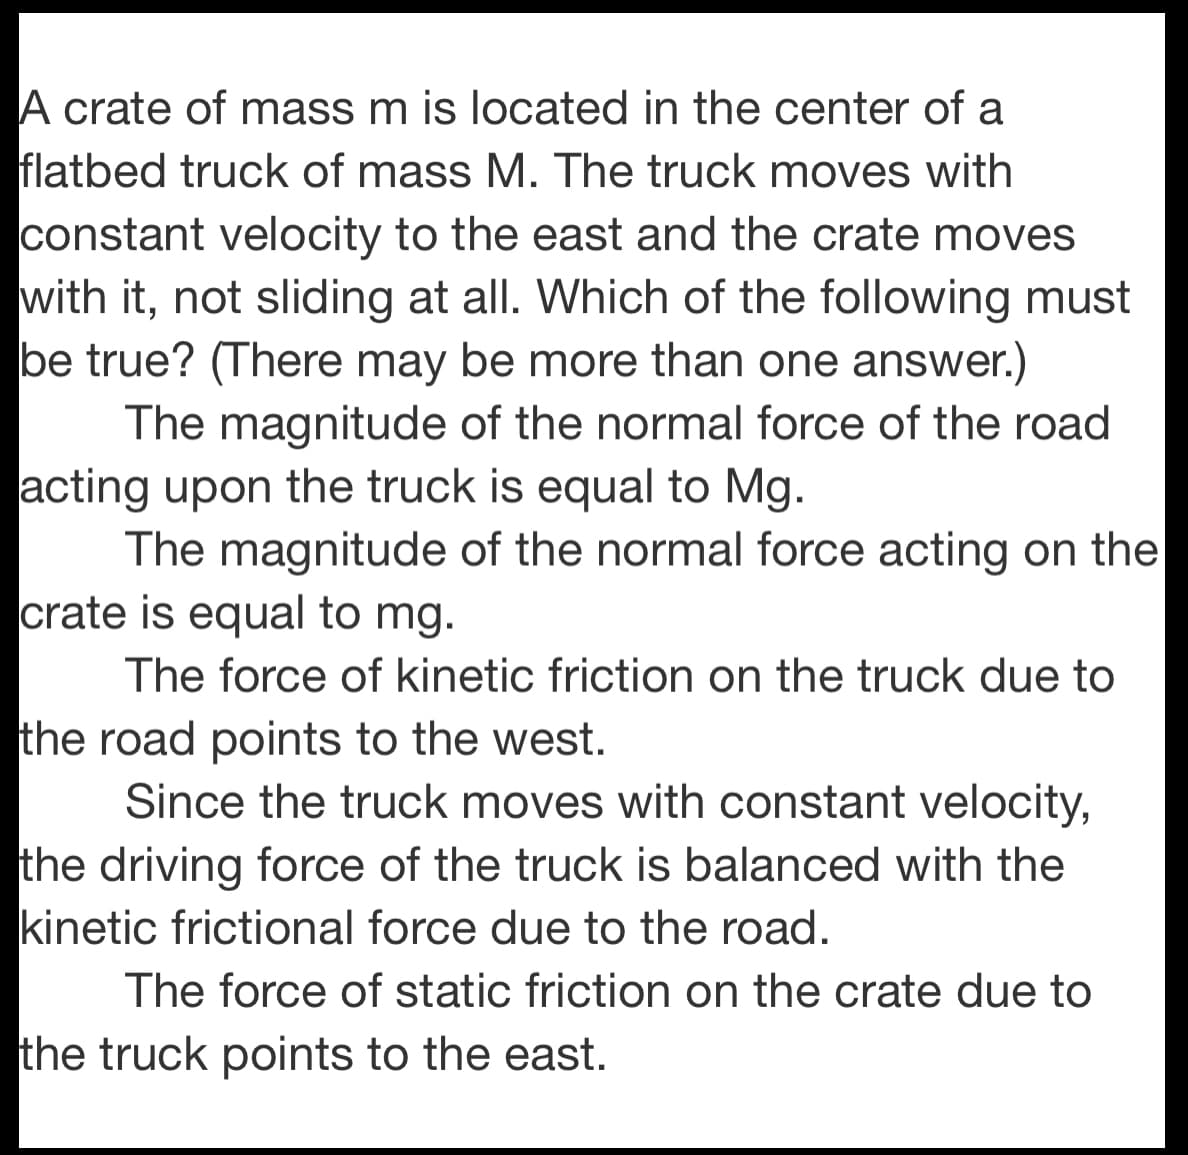 A crate of mass m is located in the center of a
flatbed truck of mass M. The truck moves with
constant velocity to the east and the crate moves
with it, not sliding at all. Which of the following must
be true? (There may be more than one answer.)
The magnitude of the normal force of the road
acting upon the truck is equal to Mg.
The magnitude of the normal force acting on the
crate is equal to mg.
The force of kinetic friction on the truck due to
the road points to the west.
Since the truck moves with constant velocity,
the driving force of the truck is balanced with the
kinetic frictional force due to the road.
The force of static friction on the crate due to
the truck points to the east.
